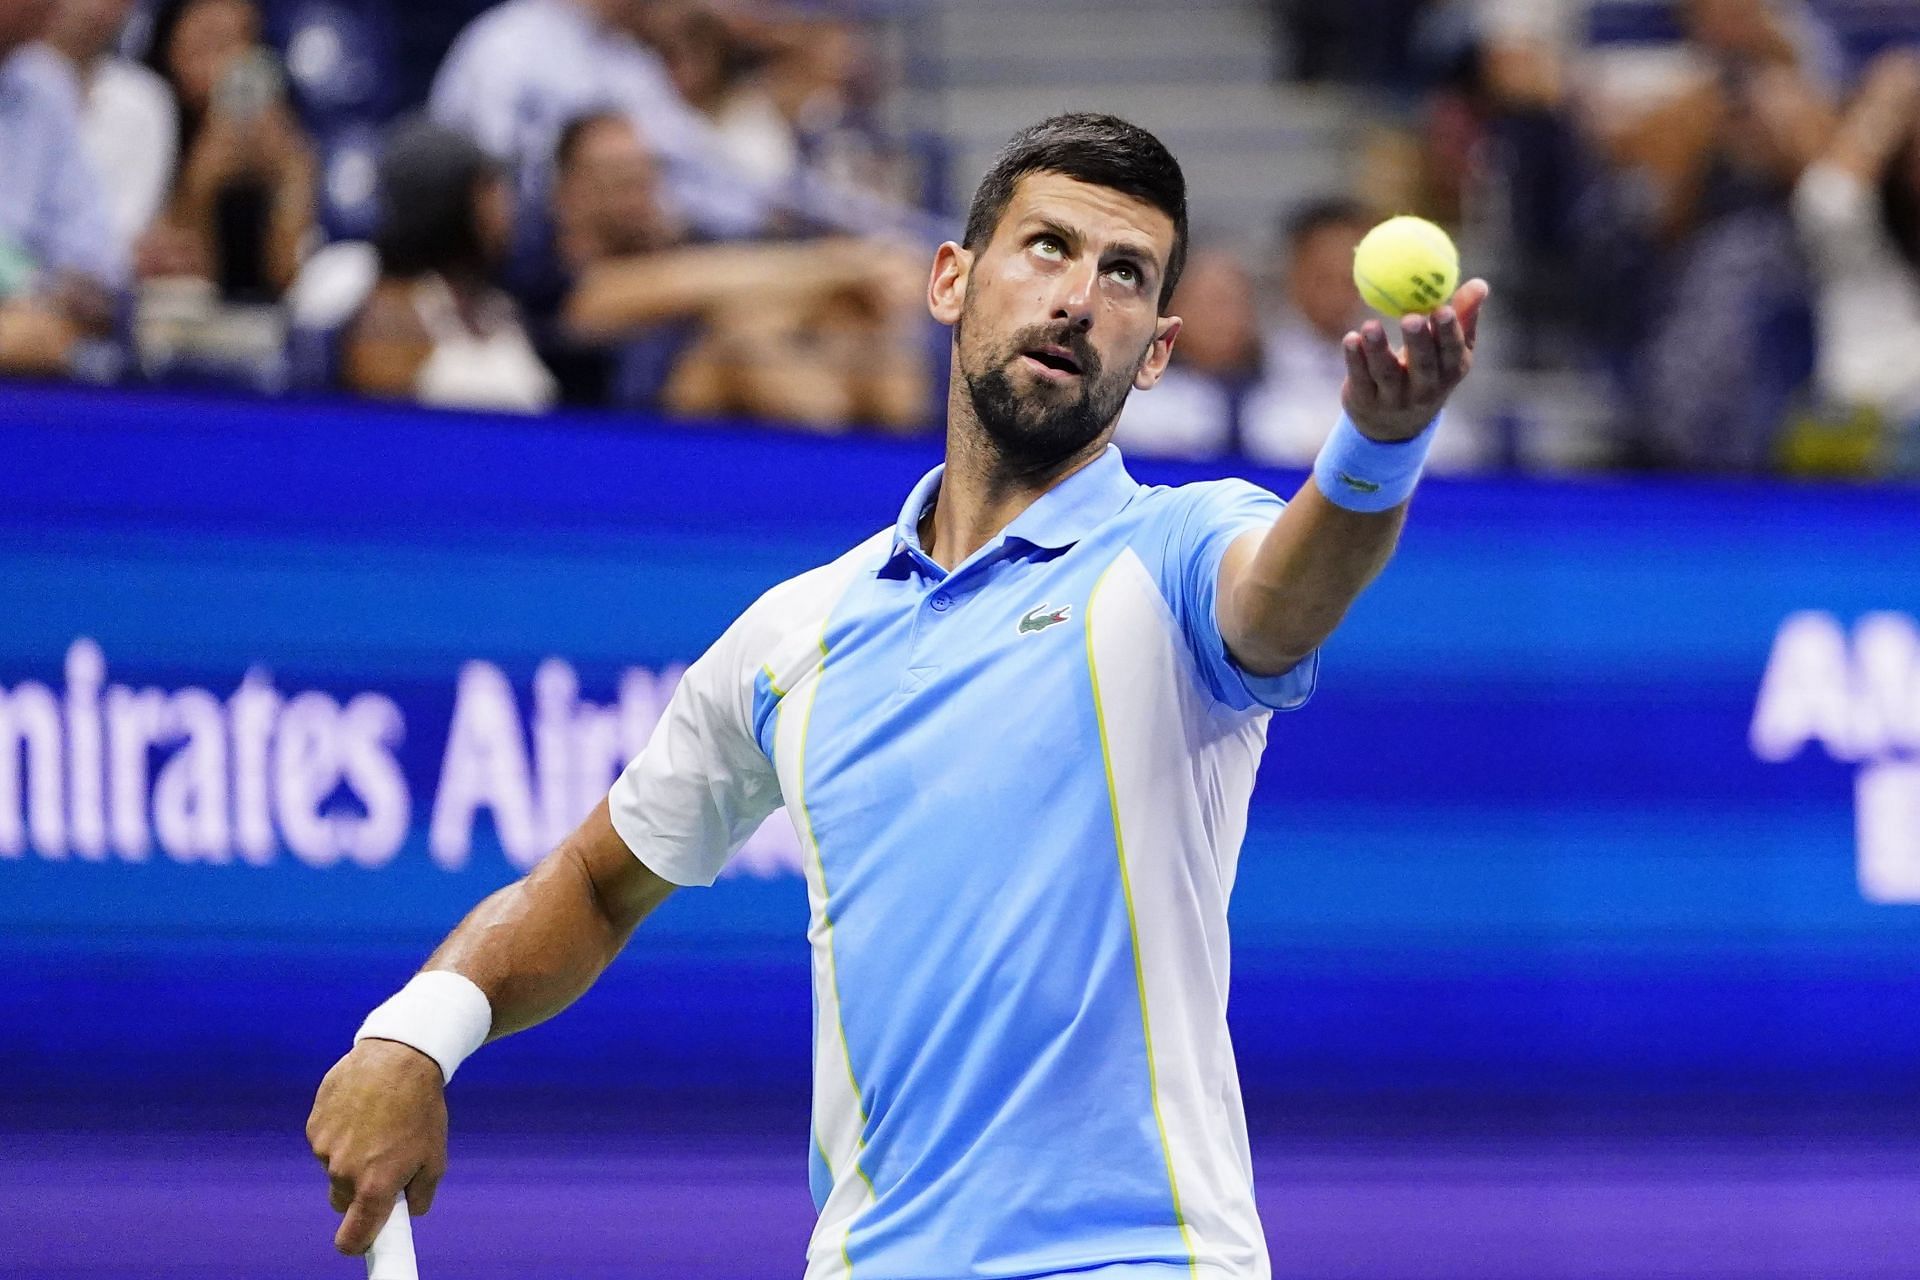 Novak Djokovic in action at the US Open